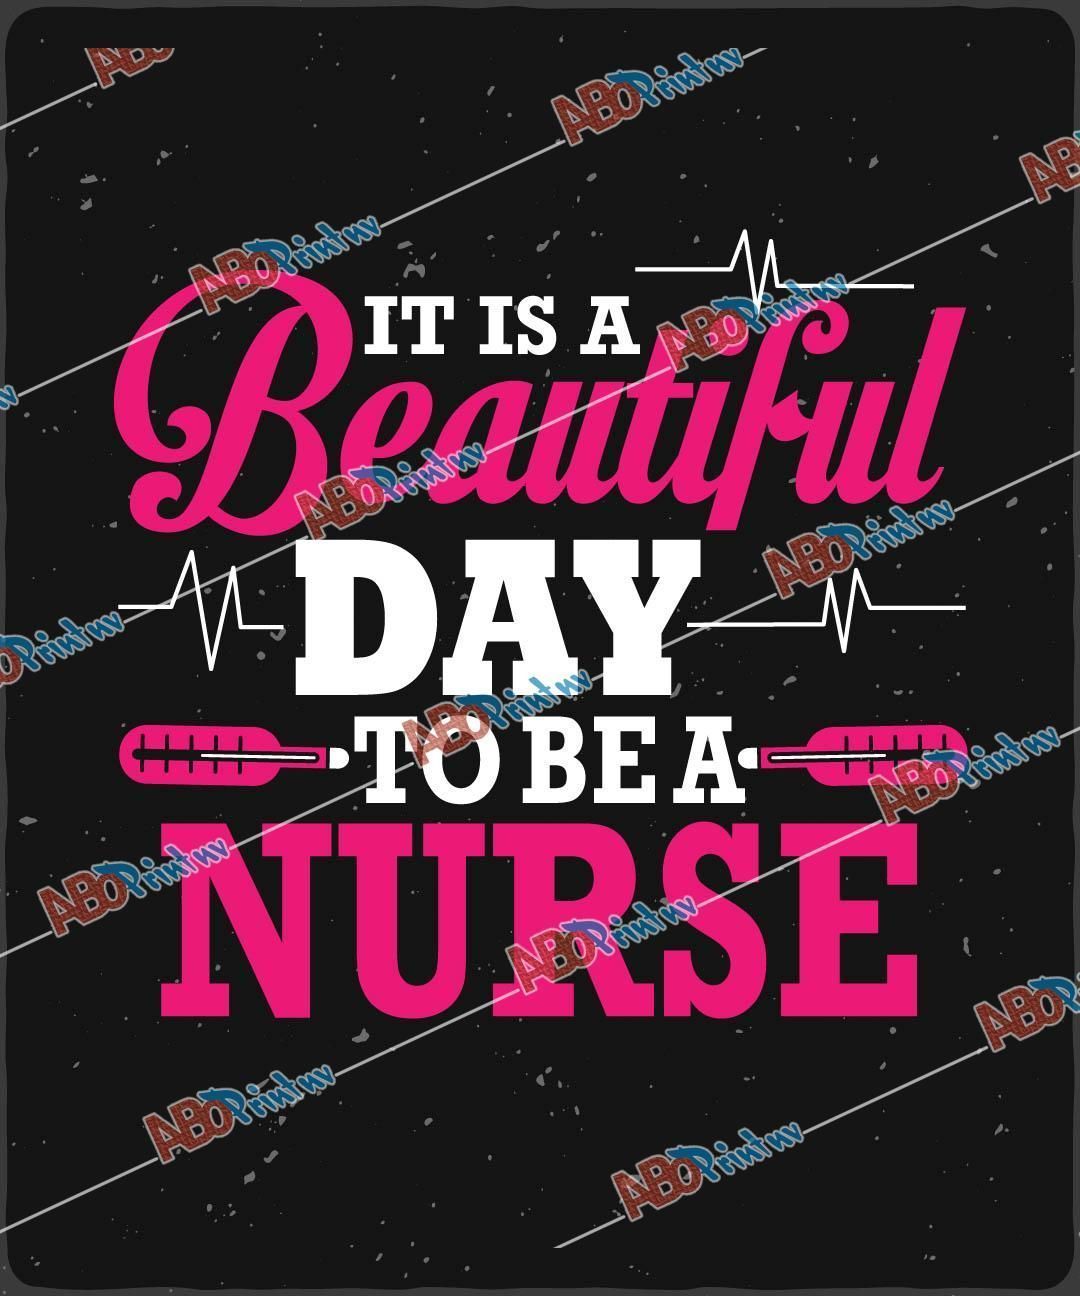 It Is A Beautiful Day To be a Nurse.jpg